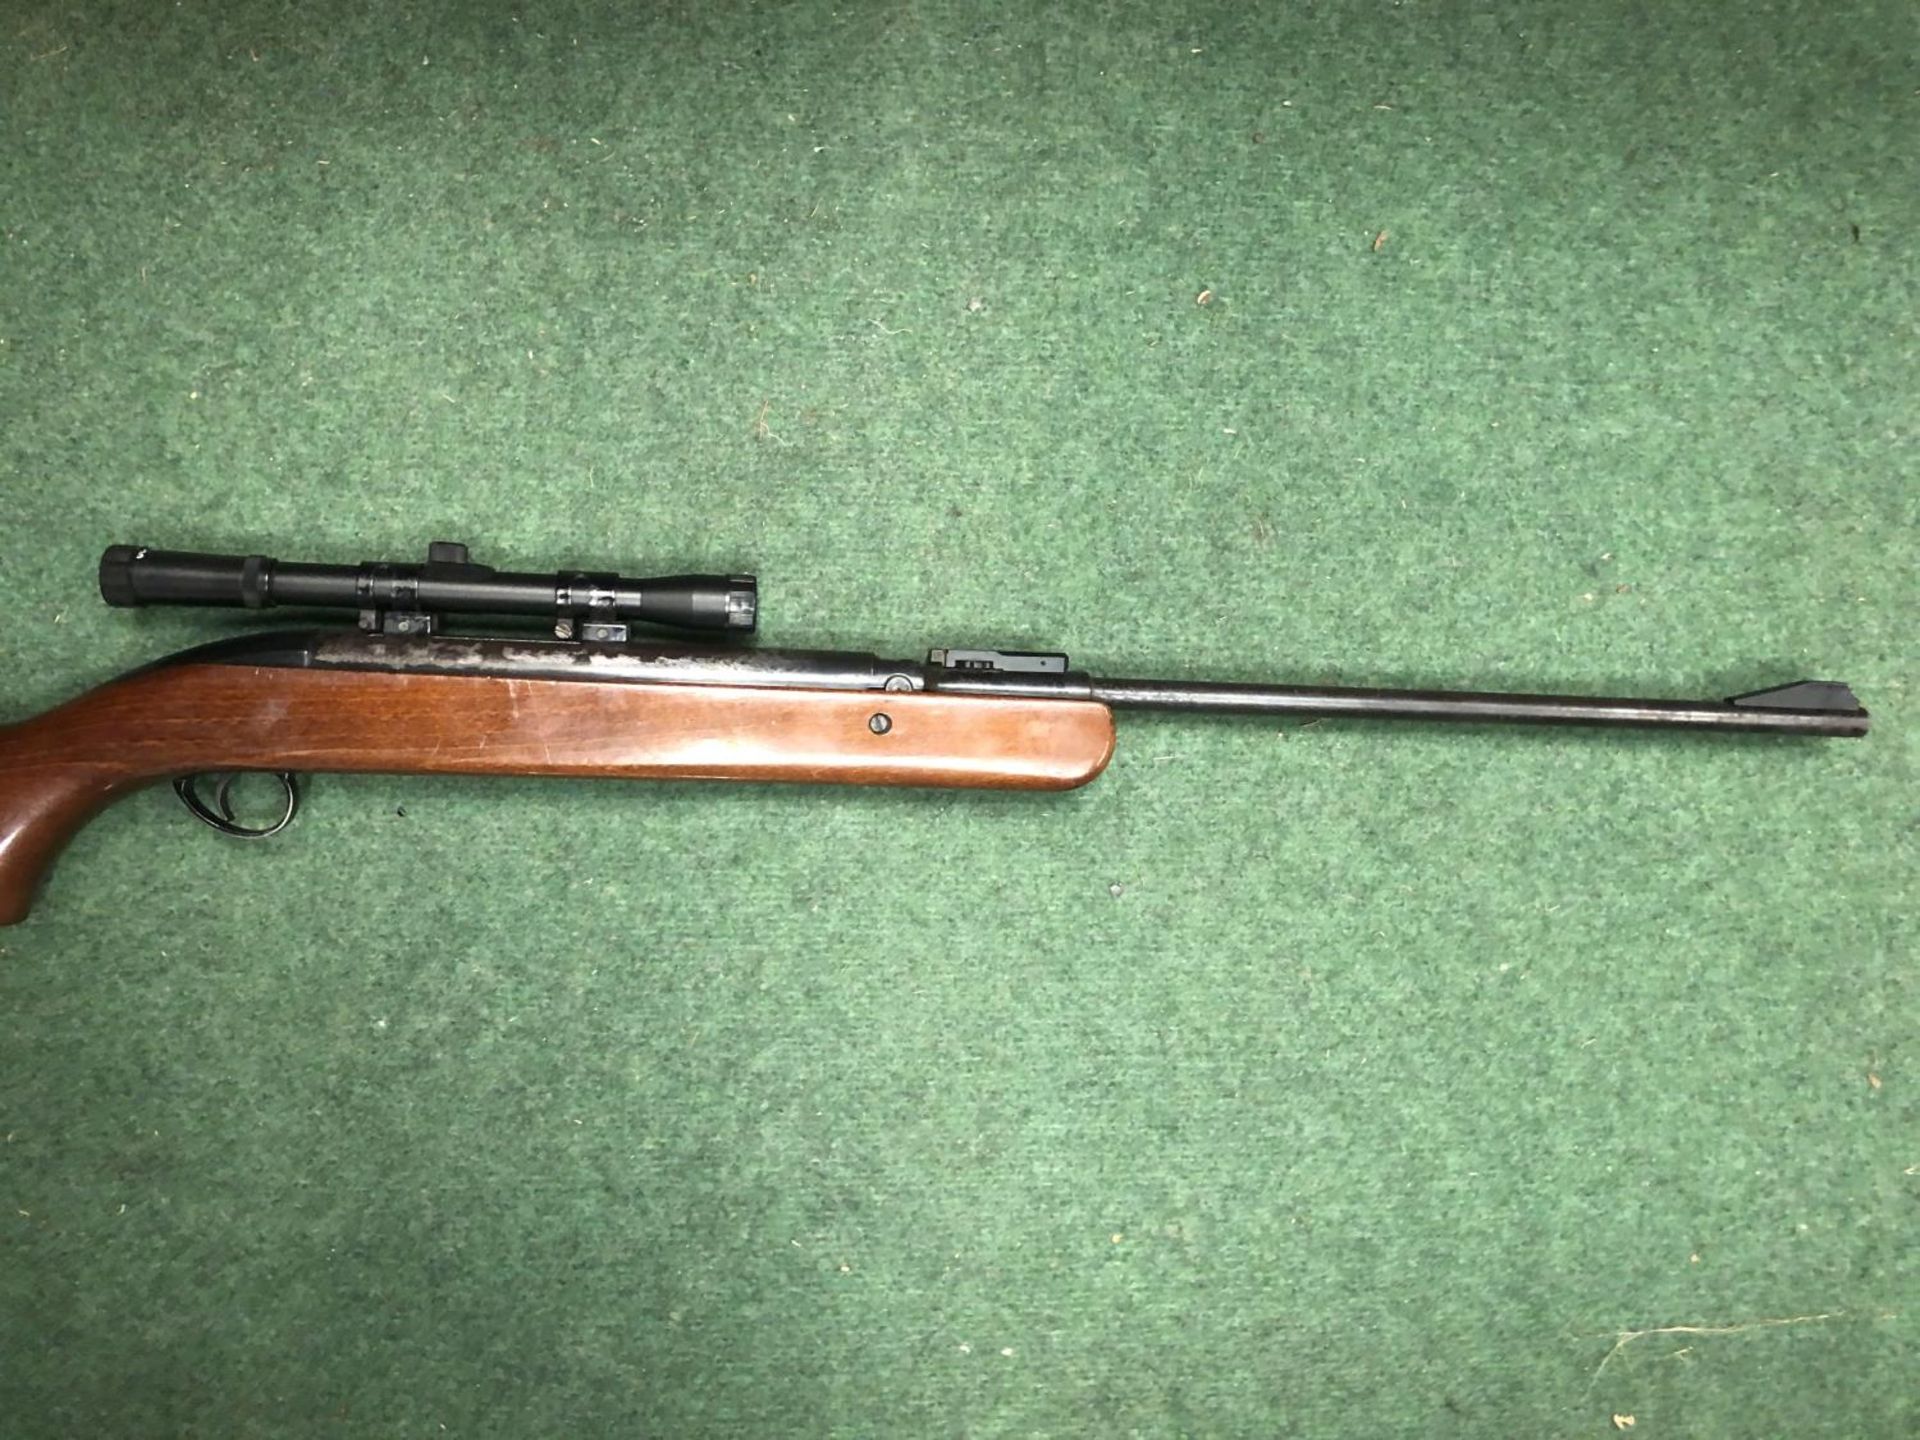 A BSA AIRSPORTER .22 CALIBRE AIR RIFLE, 47CM BARREL COMPLETE WITH TELESCOPIC SIGHT - Image 3 of 3